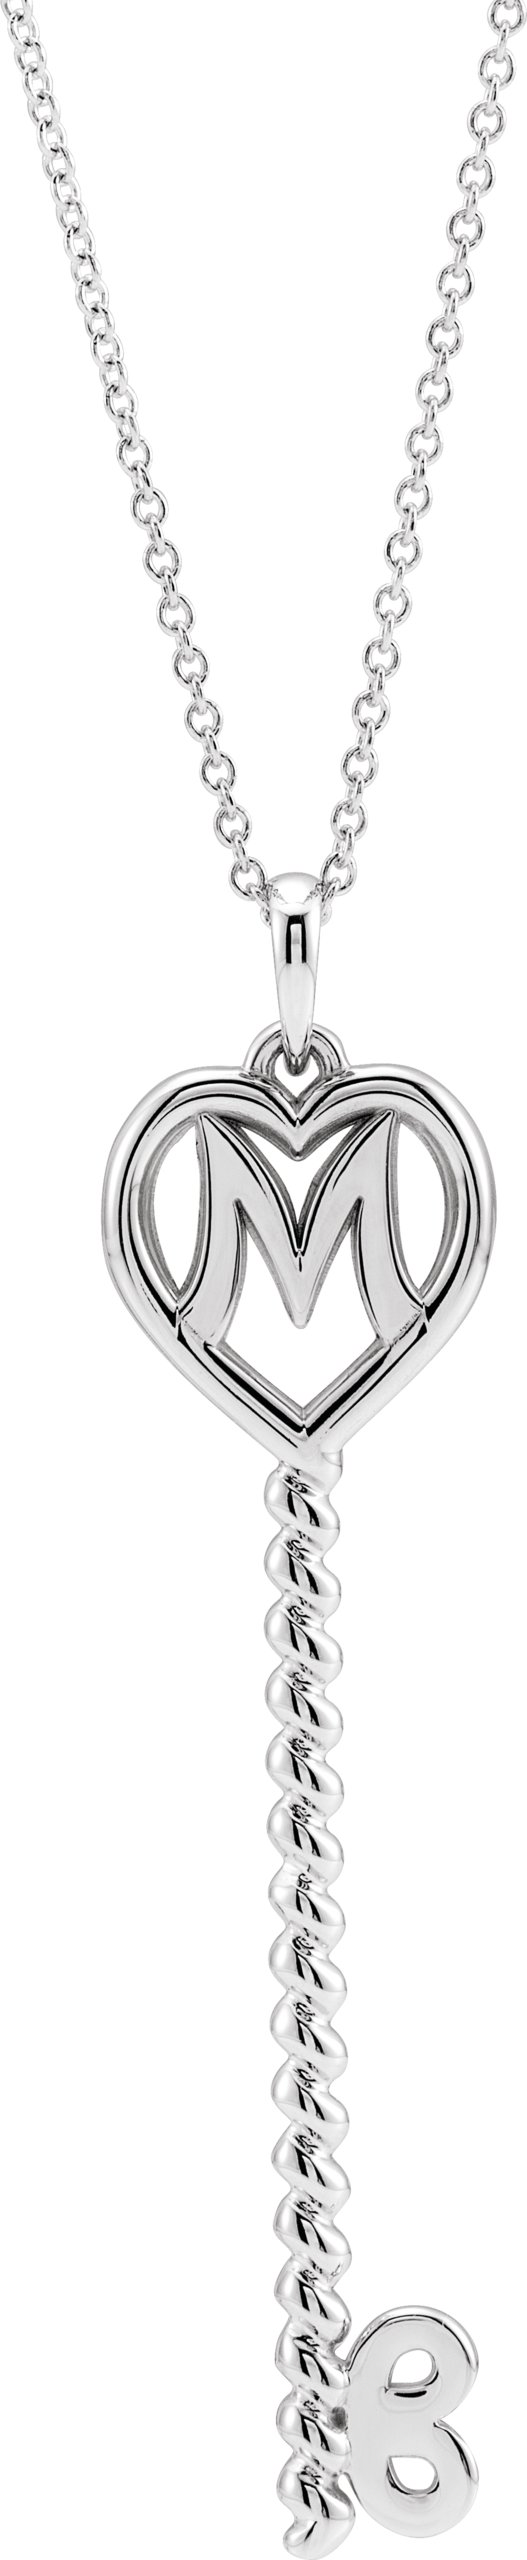 14K White Mother's Key 16 18 inch Necklace Ref. 16774470